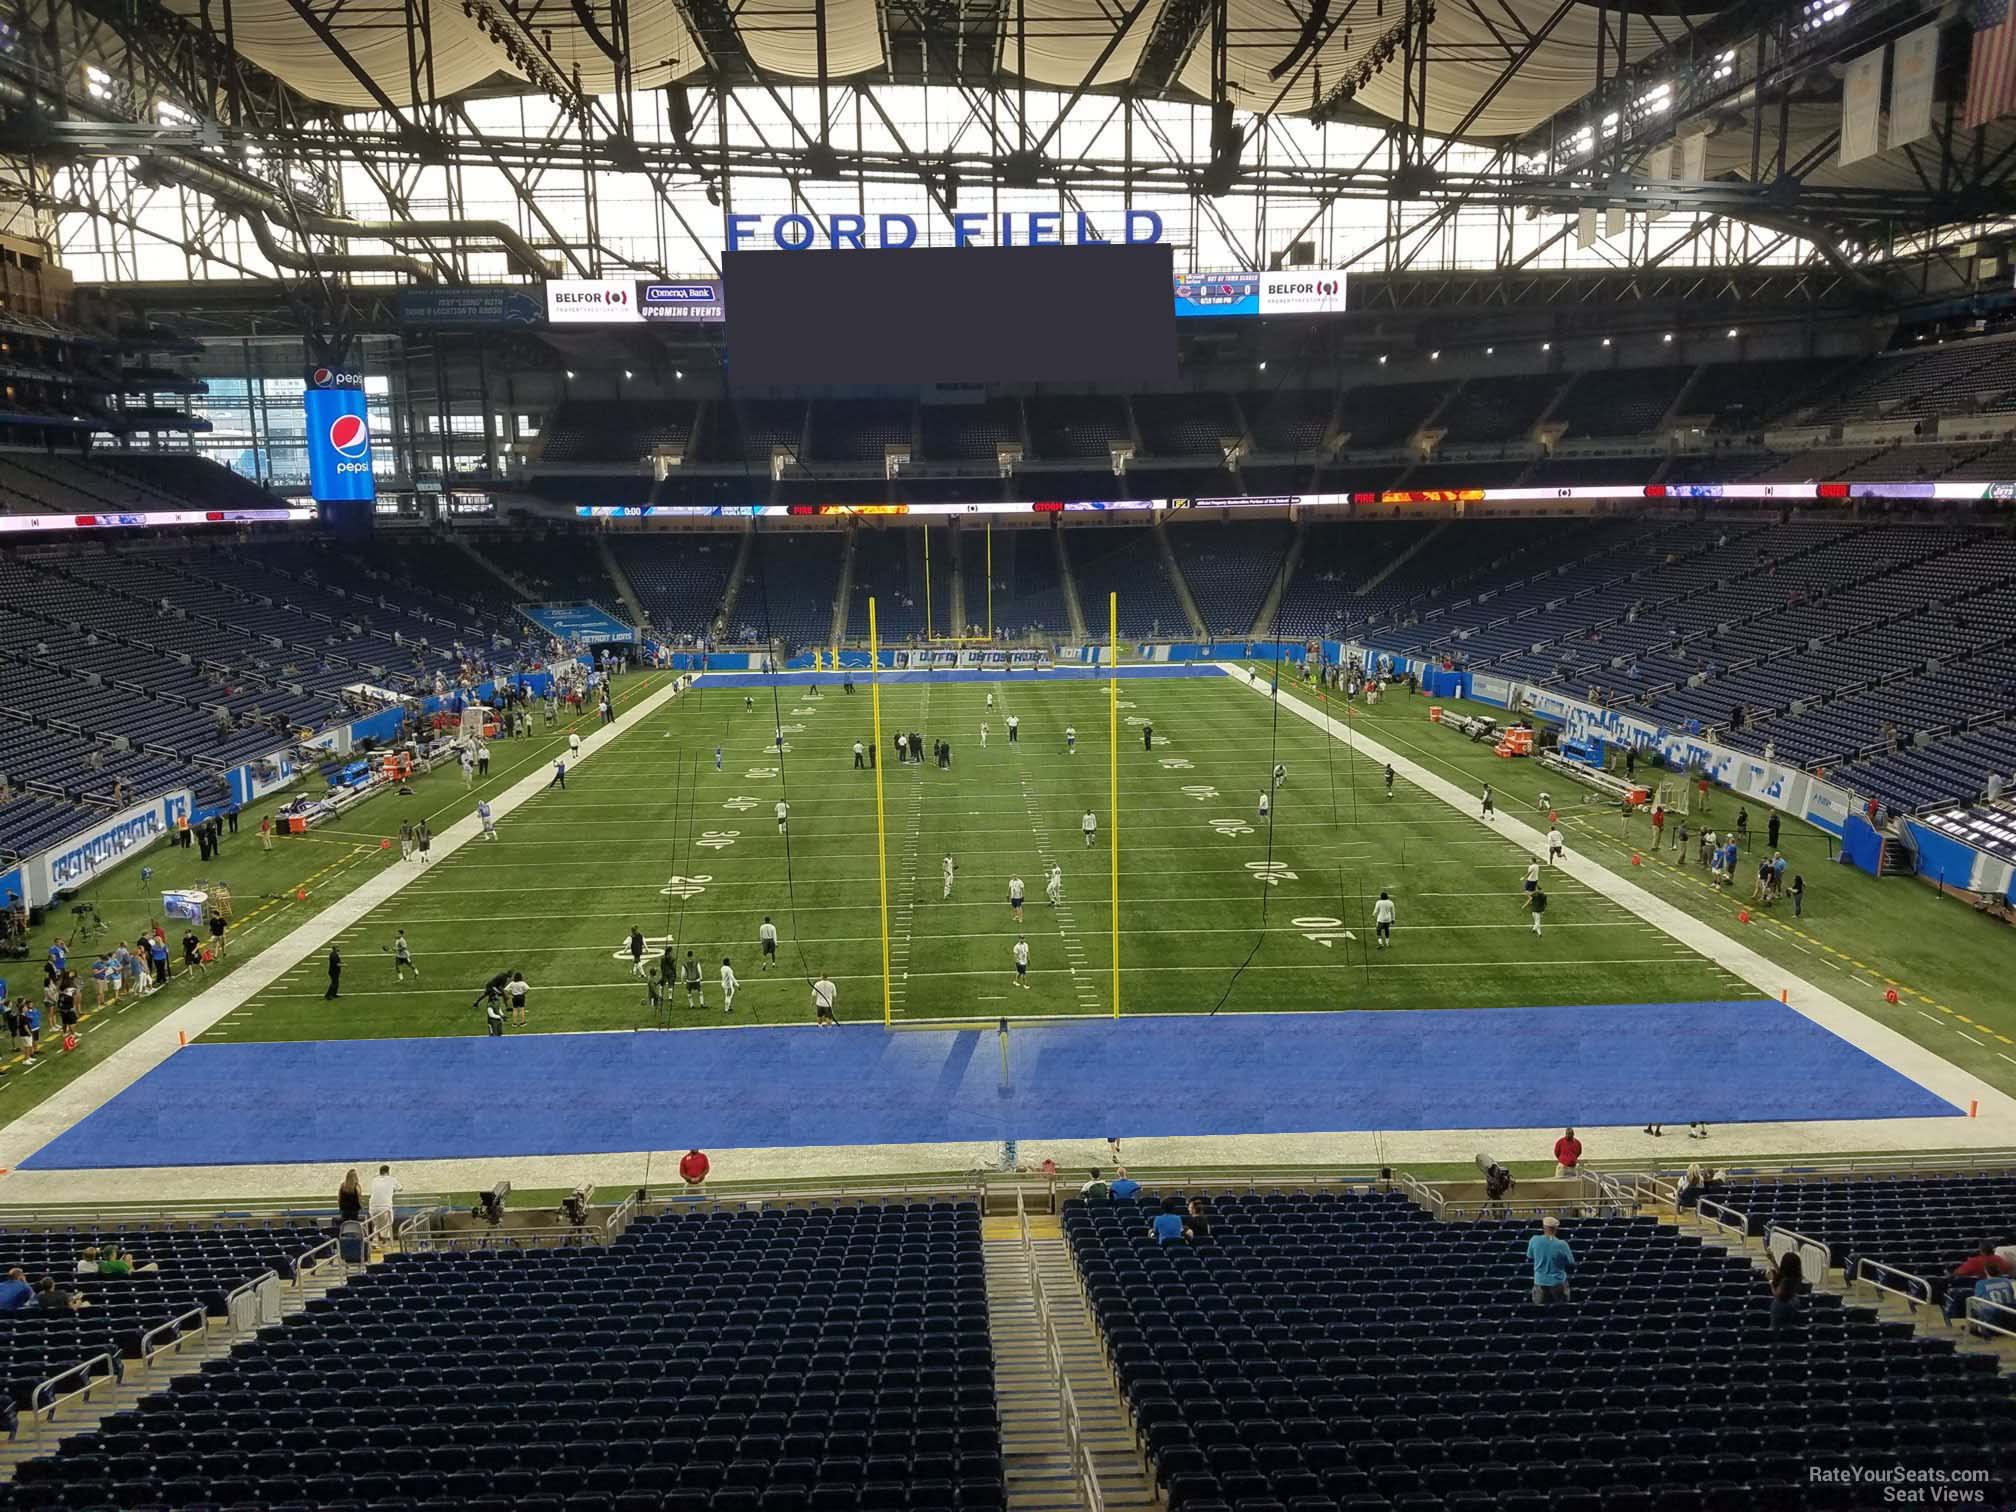 section 218, row 1 seat view  for football - ford field